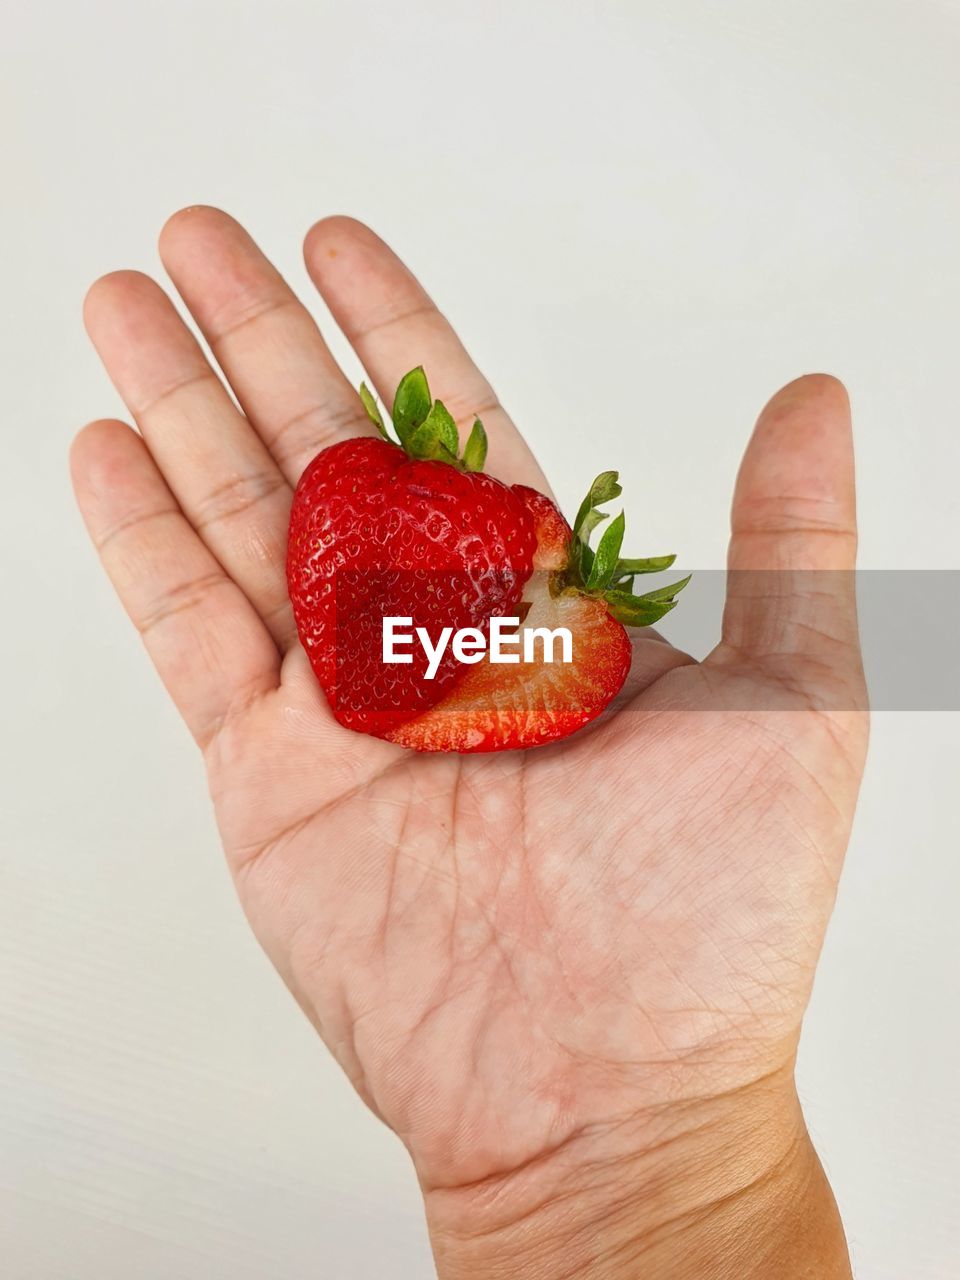 CLOSE-UP OF HAND HOLDING STRAWBERRY